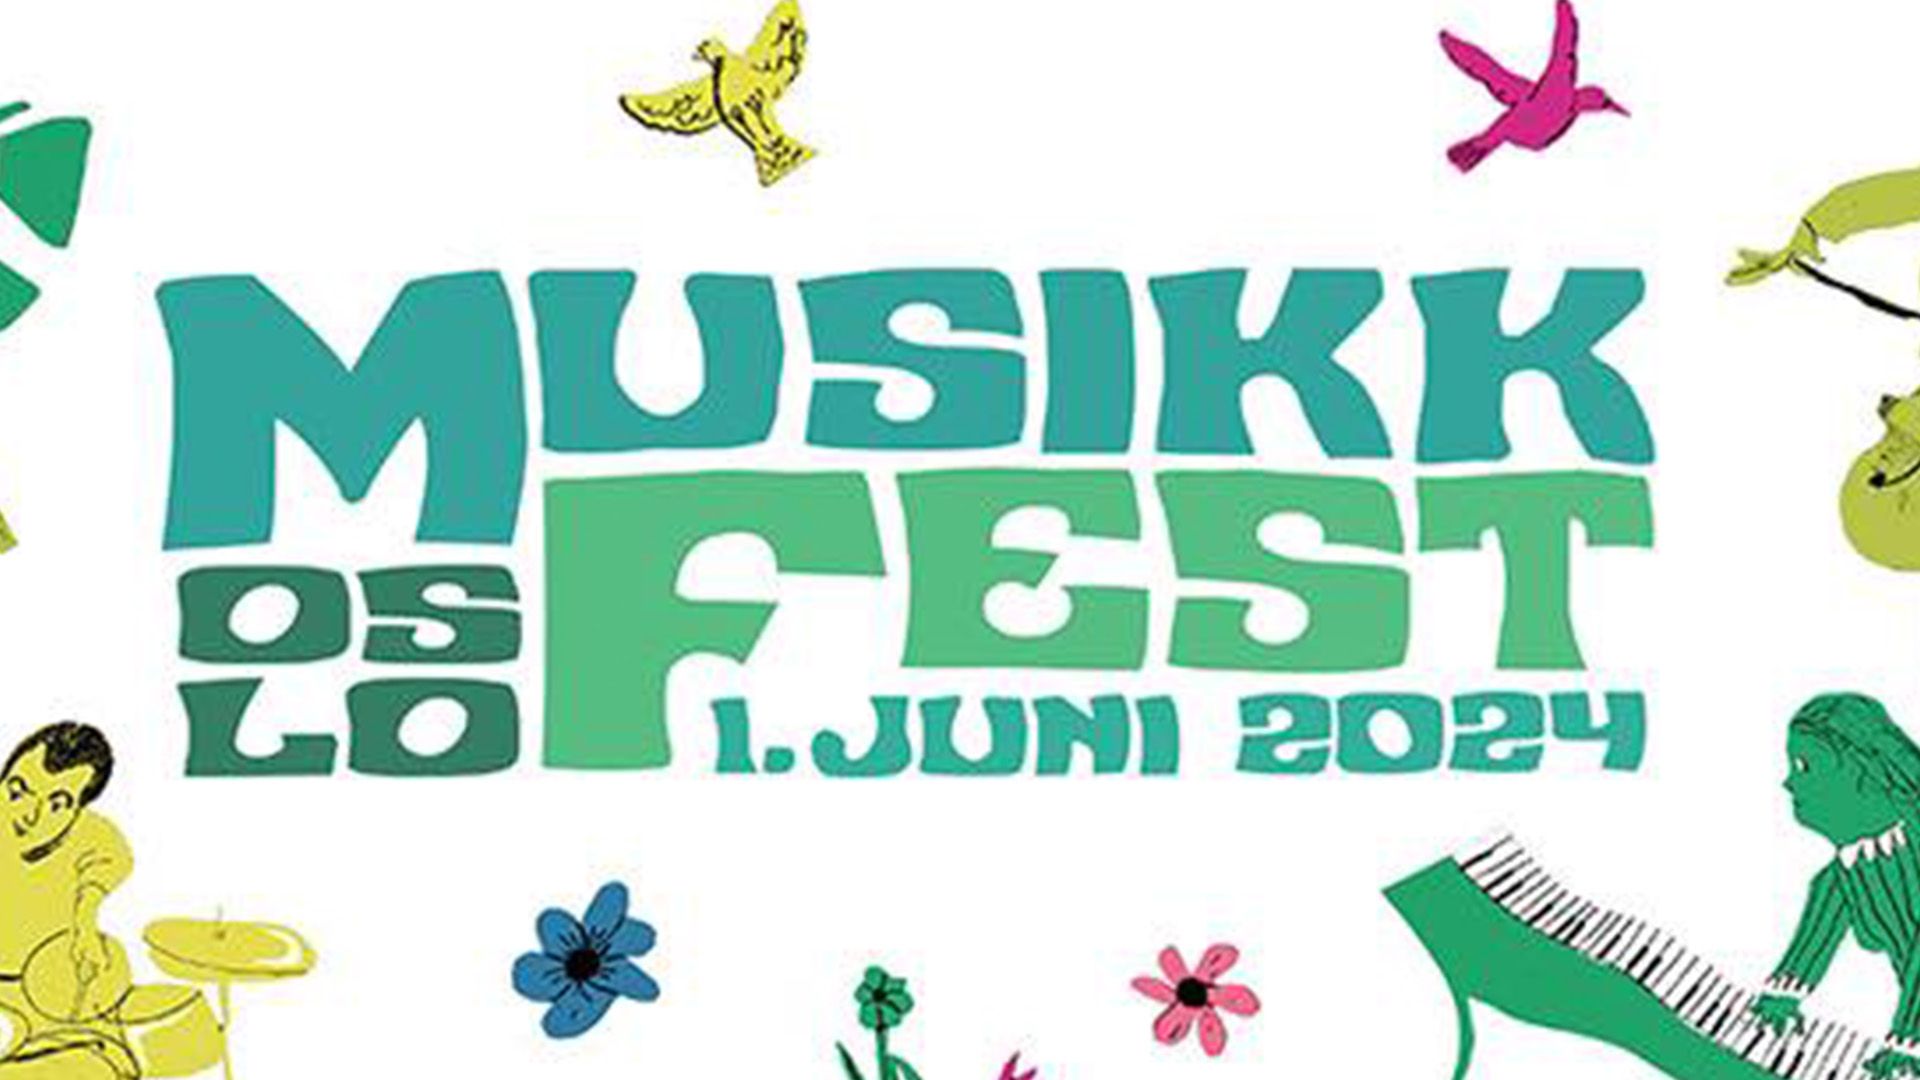 Cover Image for Musikkfest Oslo and Broadcast cooperates again!